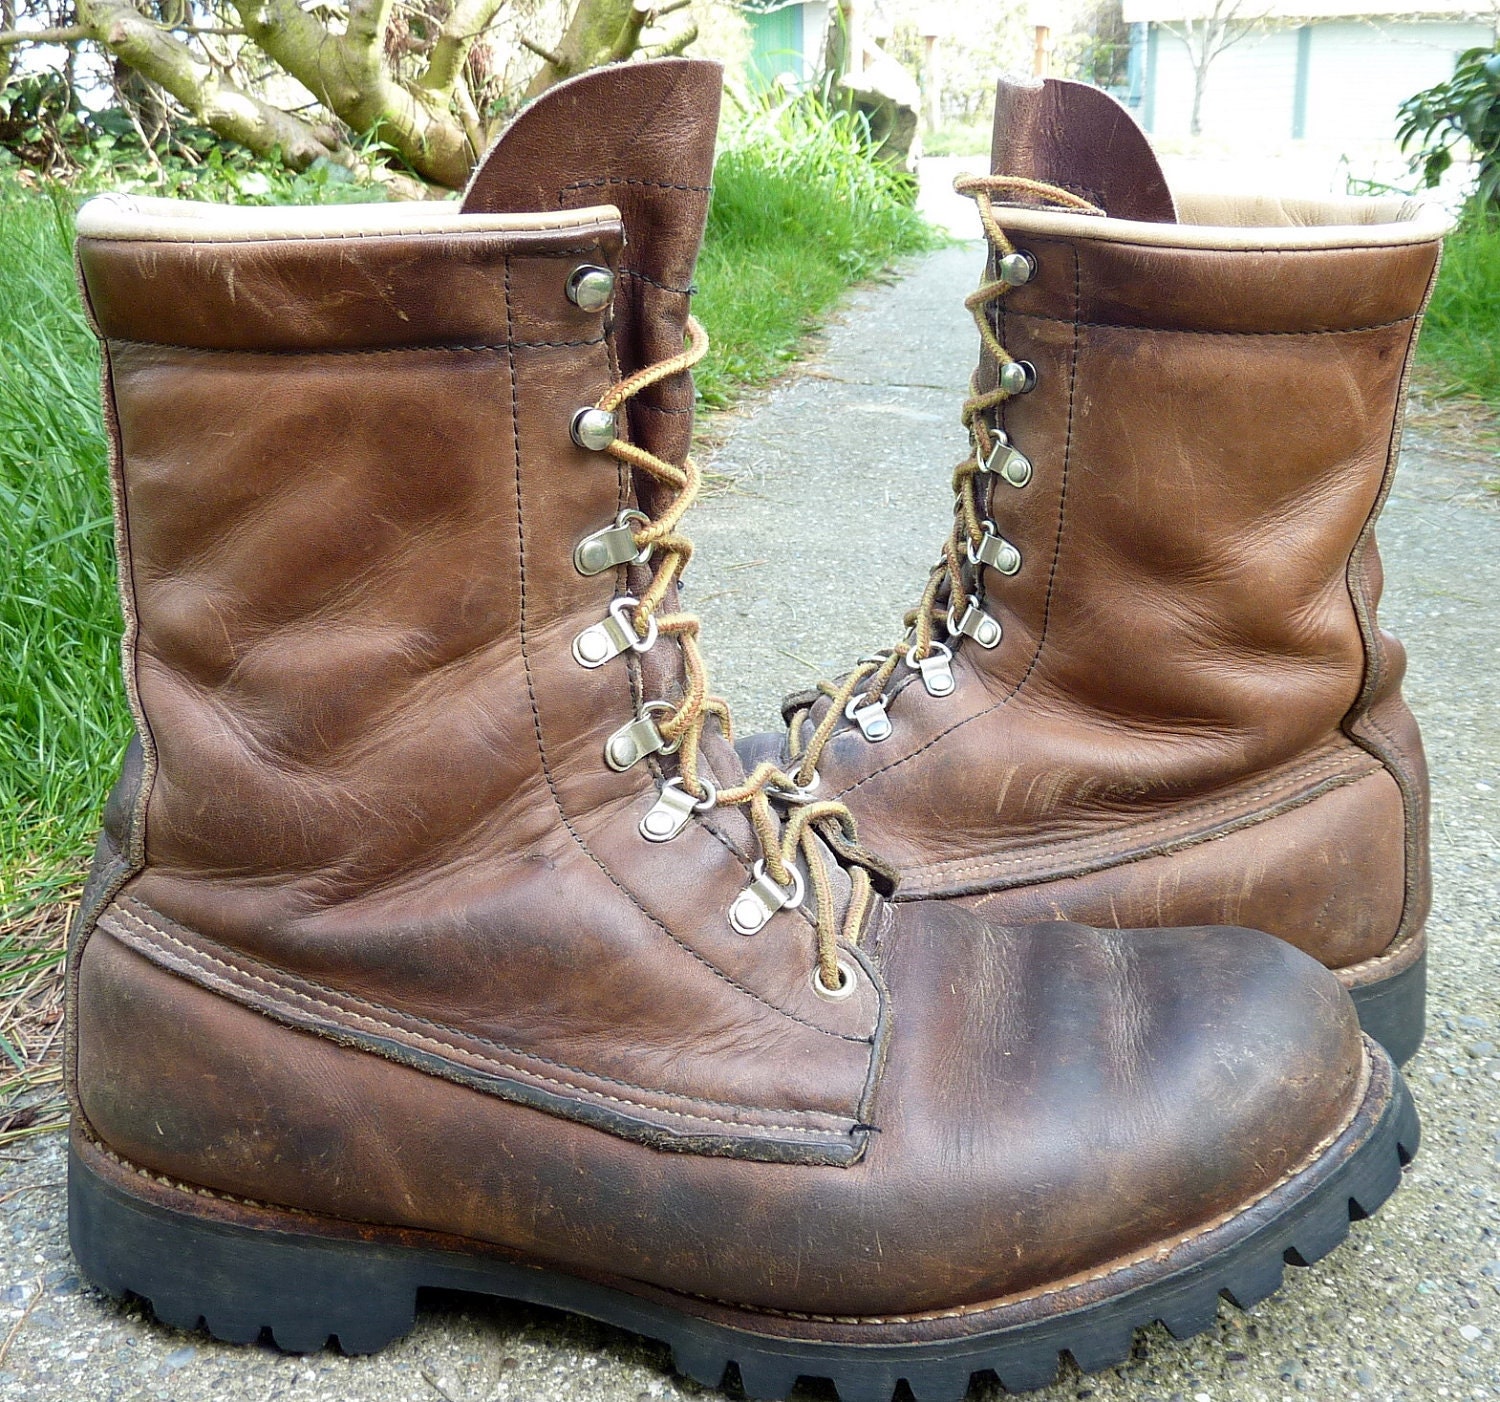 Union Bay Boots